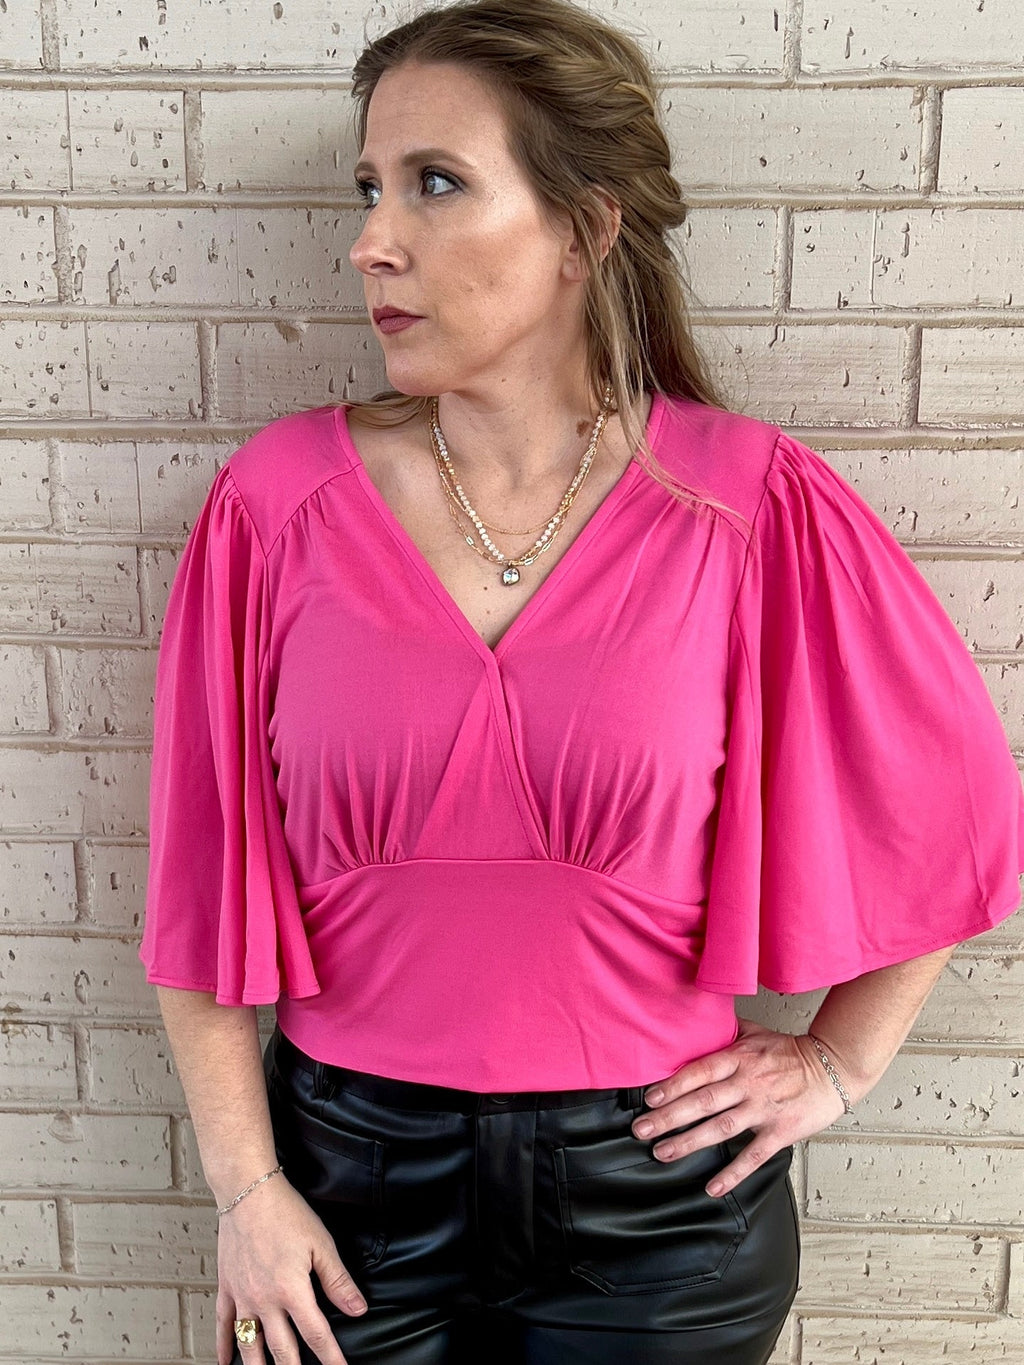 Pink bell sleeve top. Cropped bell sleeve top. Fashion trends 2024. Women's outfits. Women's clothes. Women's apparel. Business top. Business clothes. Business casual. Pink top. Dressy top. Pink dressy top. Big sleeves. Spring outfit. Spring top. Boutique fashion. Women's fashion. Women's style. Small business.